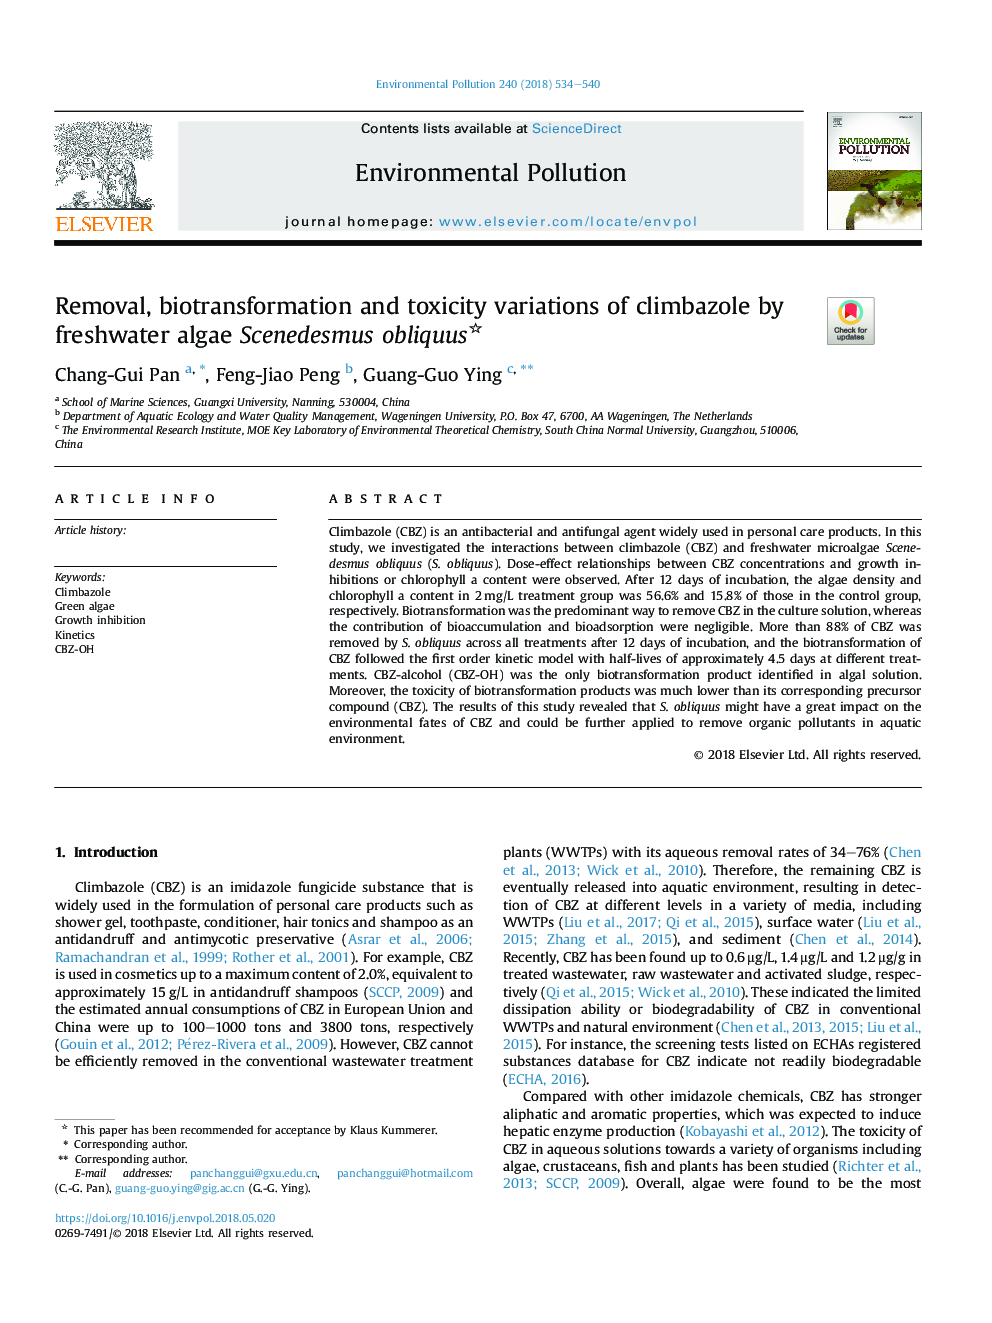 Removal, biotransformation and toxicity variations of climbazole by freshwater algae Scenedesmus obliquus